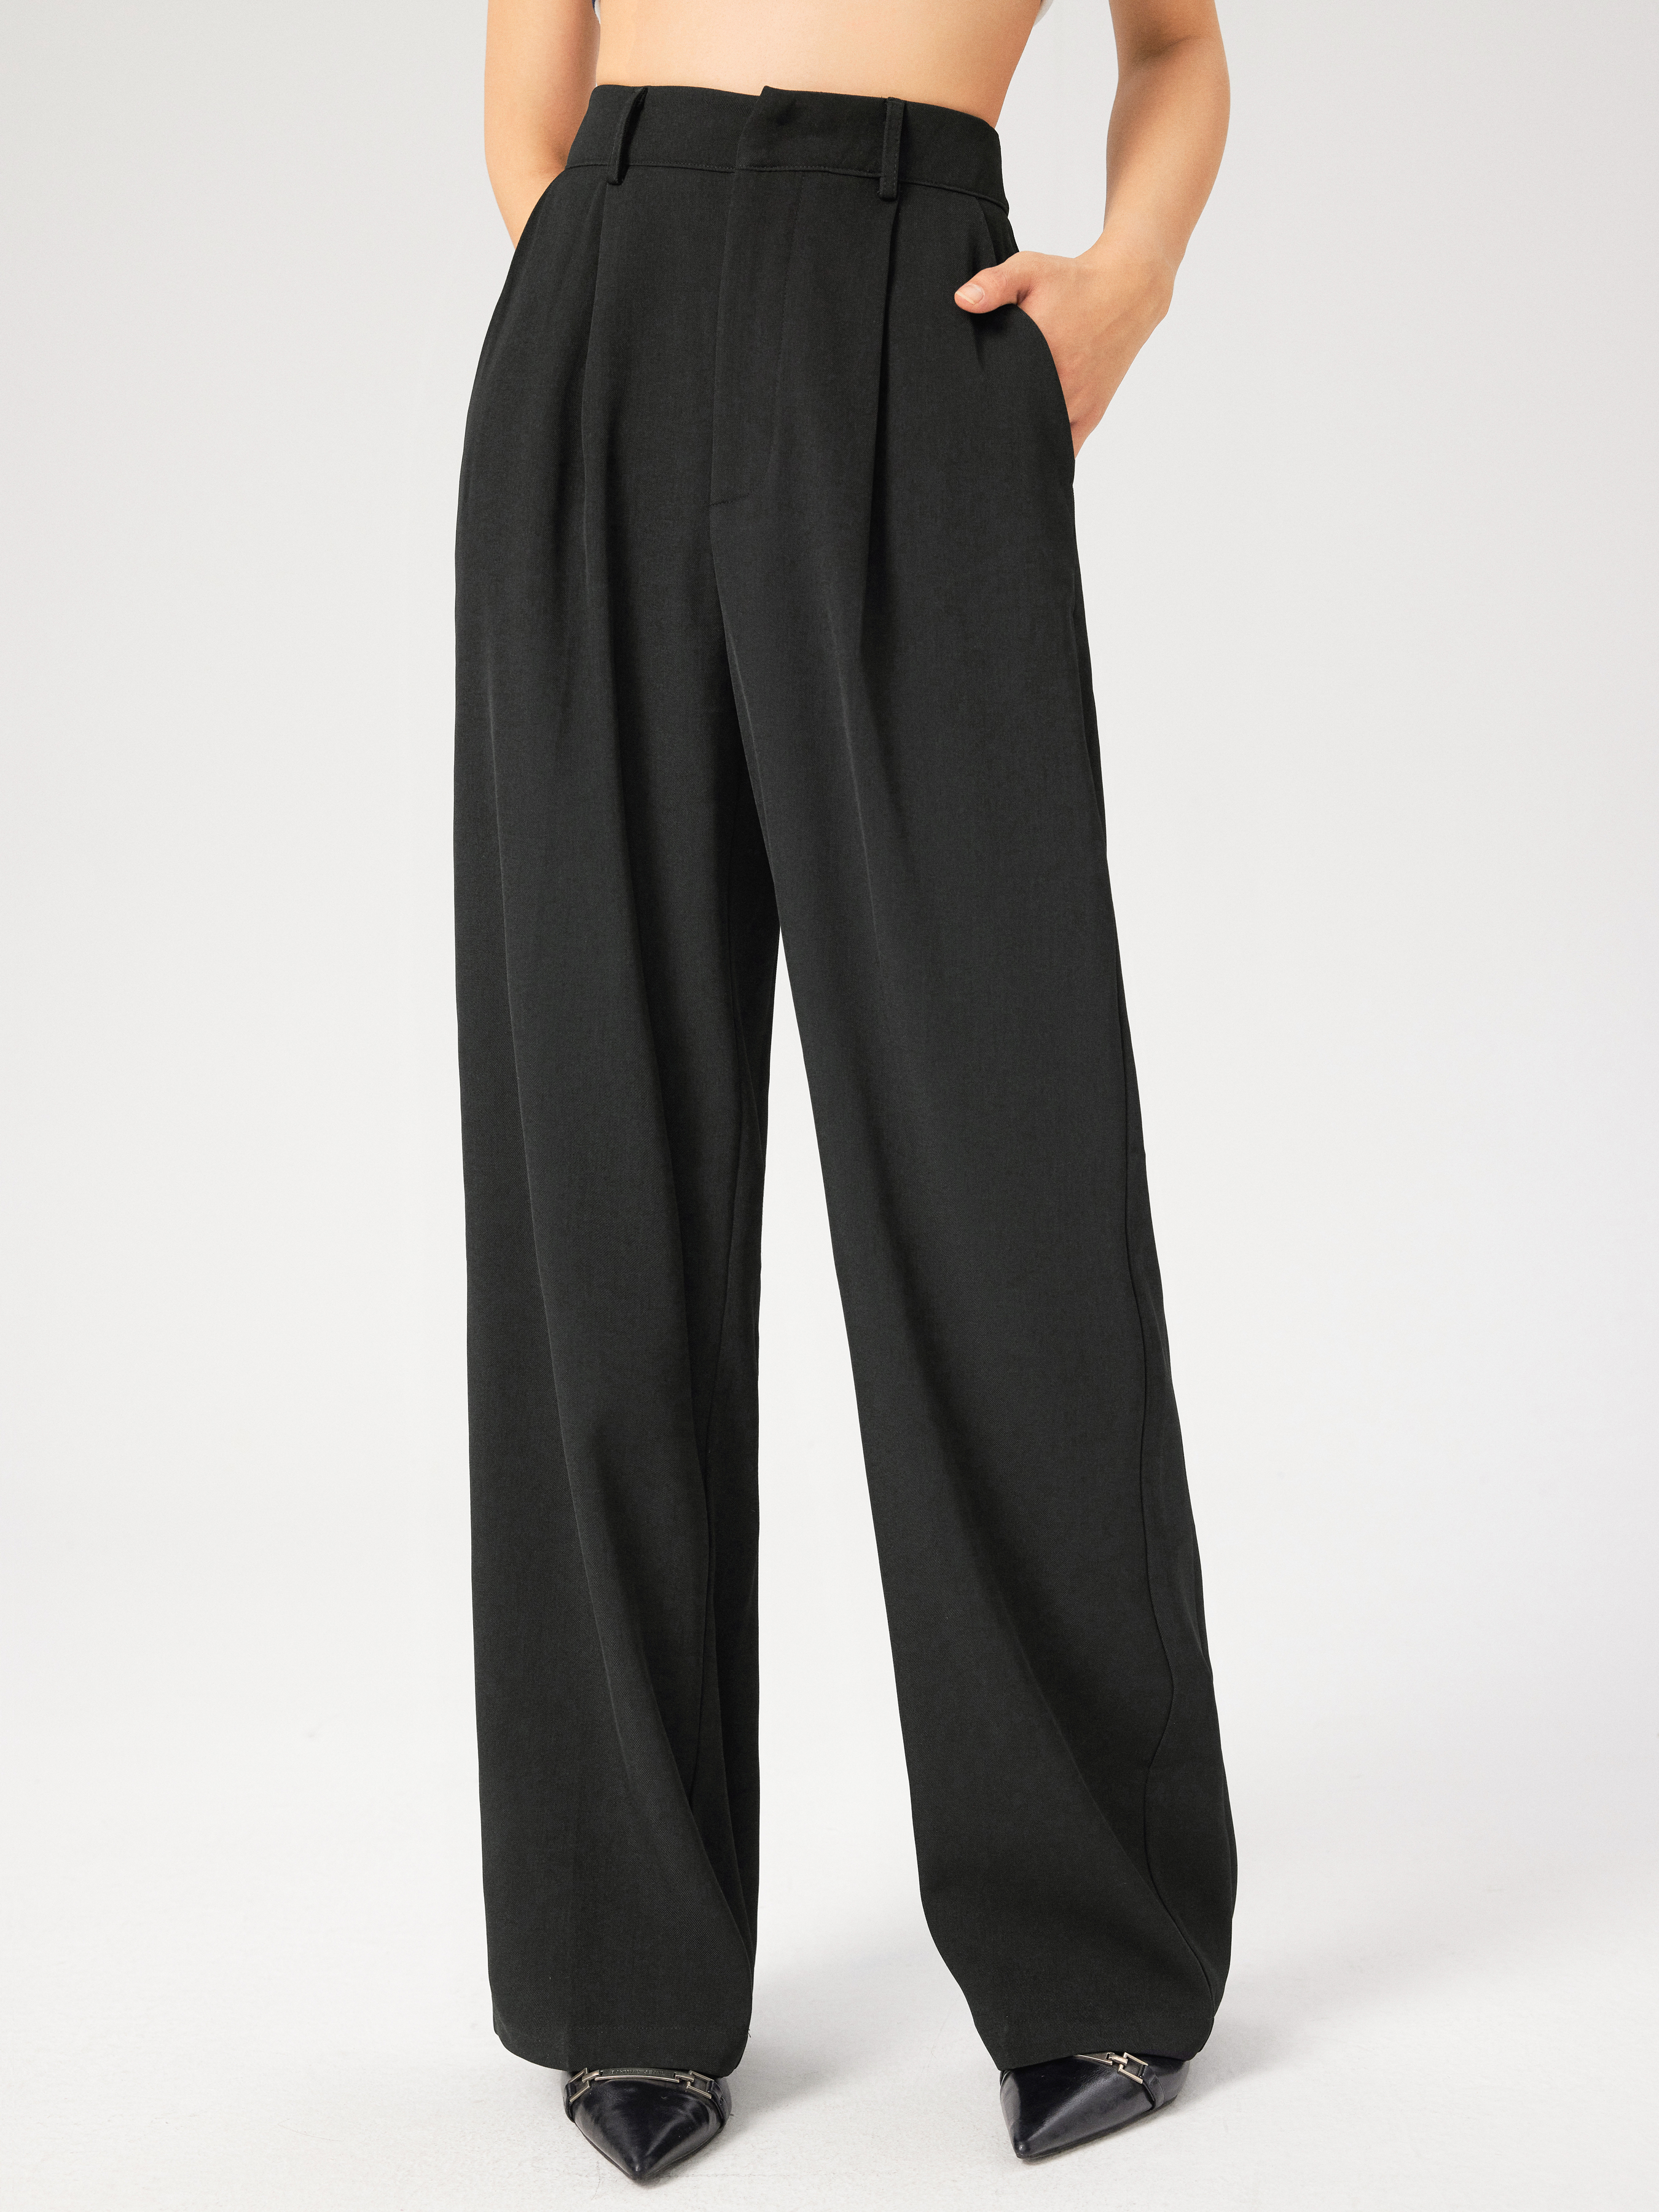 Ciao Darling Pleated High Waist Pants • Impressions Online Boutique